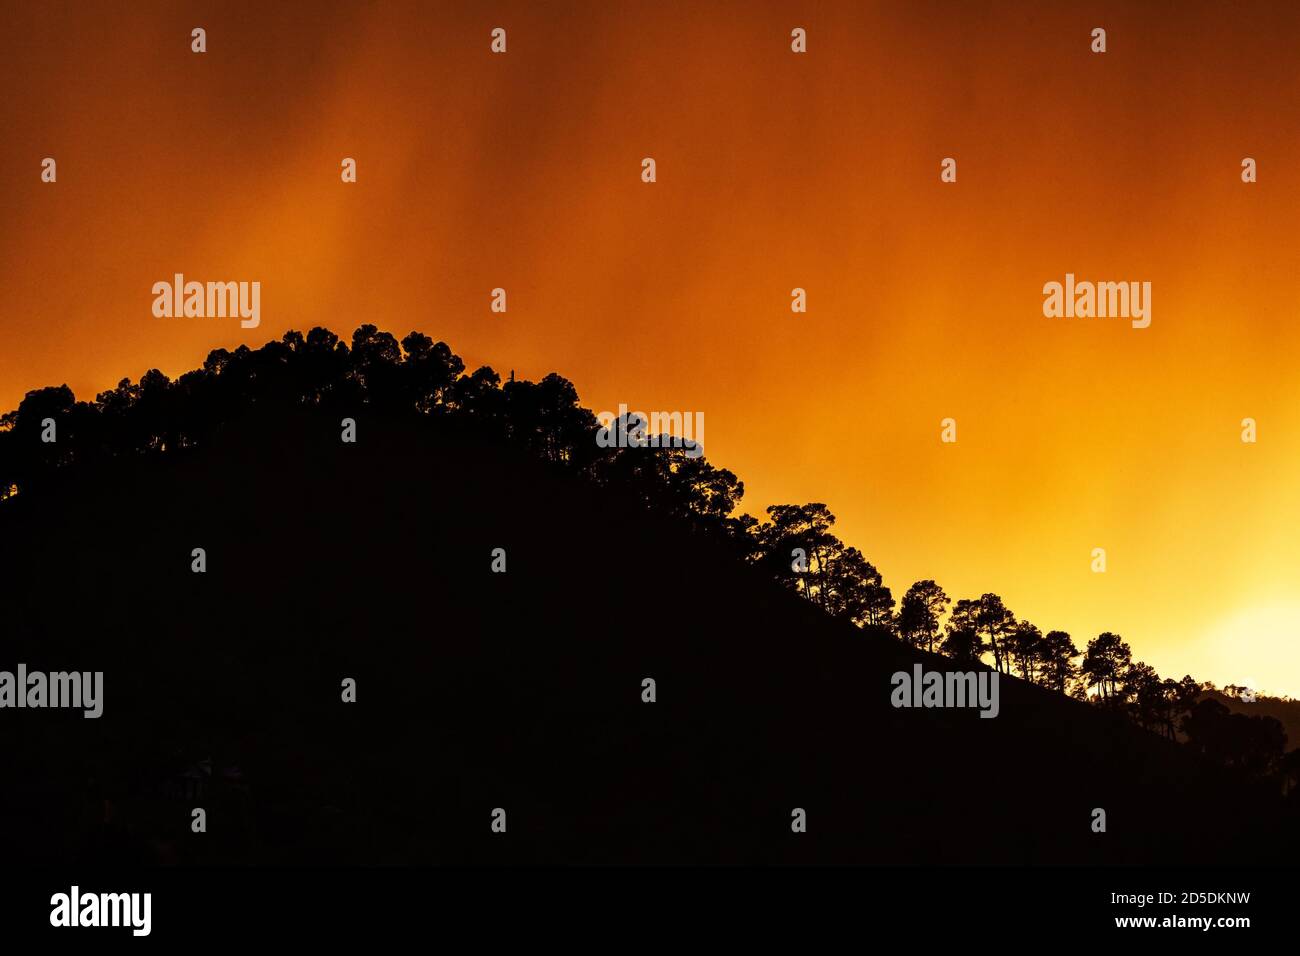 Fiery sky over silhouetted hill Stock Photo